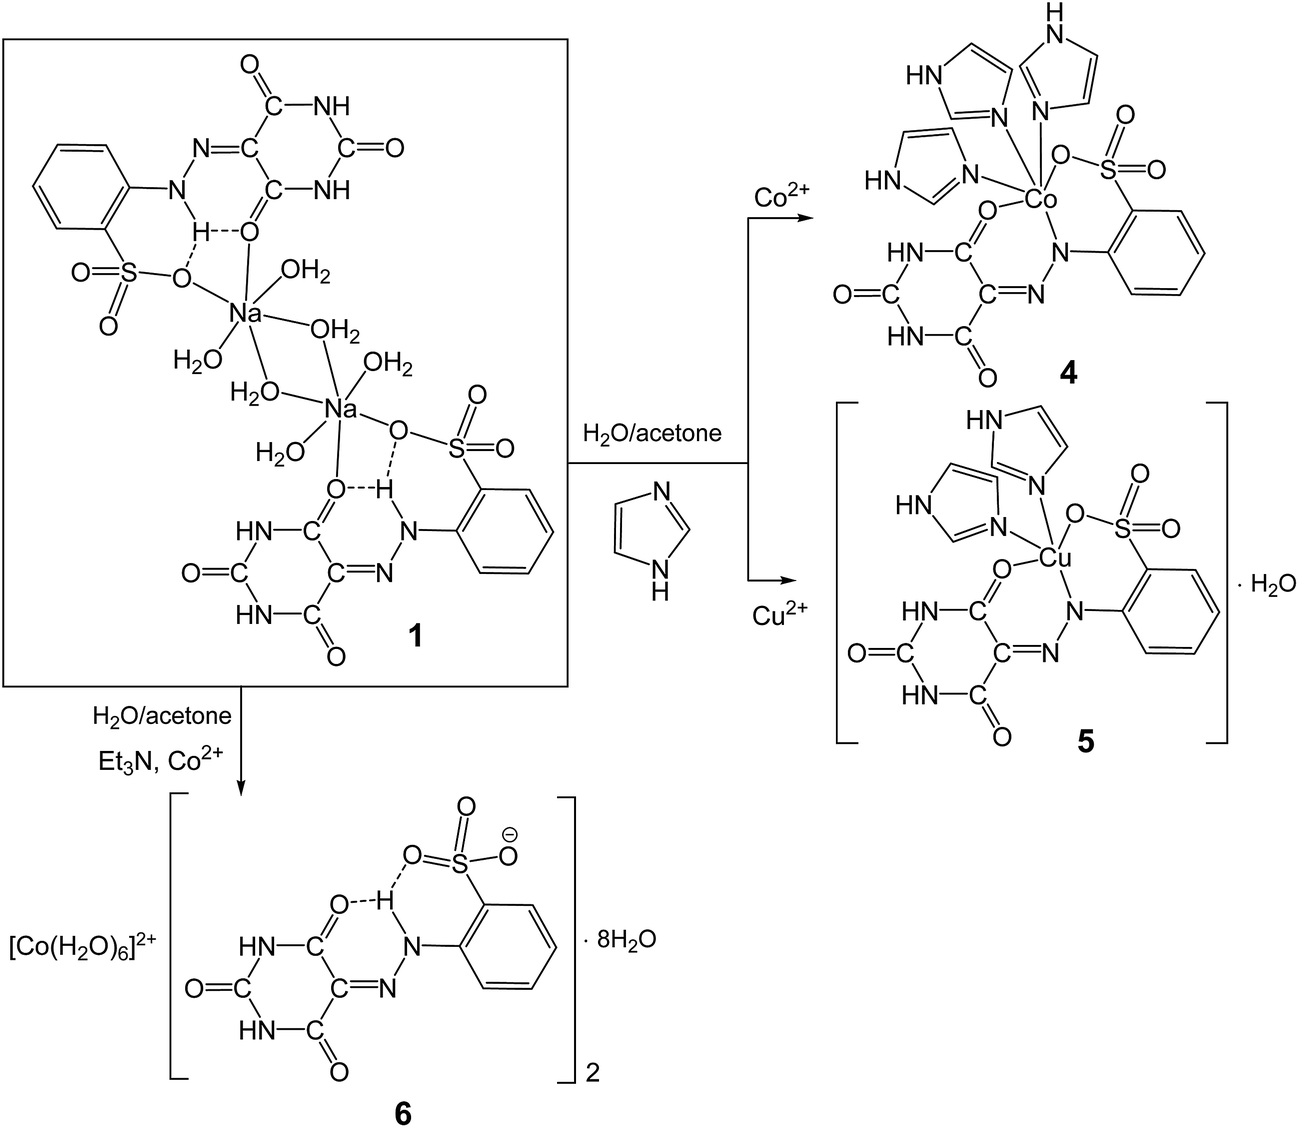 Arylhydrazones Of Barbituric Acid Synthesis Coordination Ability And Catalytic Activity Of Their Coii Coii Iii And Cuii Complexes Toward Peroxidative Oxidation Of Alkanes Rsc Advances Rsc Publishing